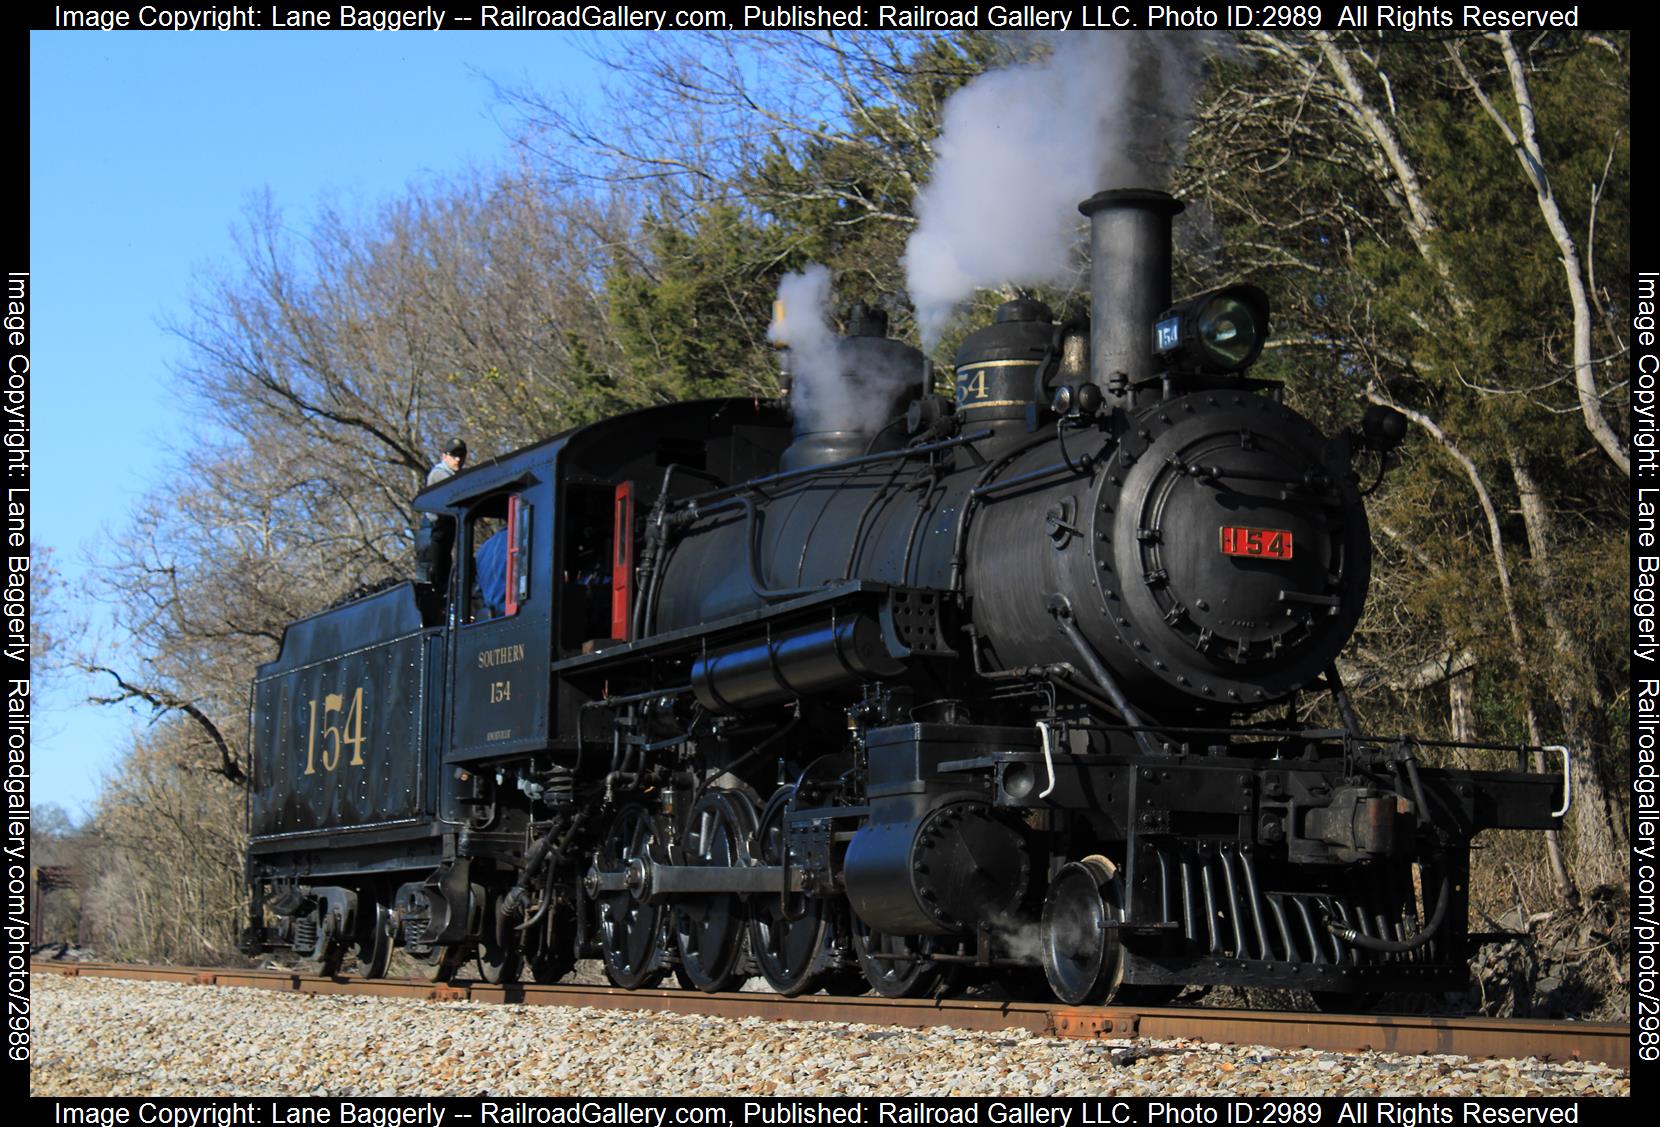 SOU 154 is a class 2-8-0 and  is pictured in Knoxville, Tennessee, United States.  This was taken along the Knoxville & Holston on the Southern Railway. Photo Copyright: Lane Baggerly uploaded to Railroad Gallery on 01/18/2024. This photograph of SOU 154 was taken on Sunday, December 12, 2021. All Rights Reserved. 